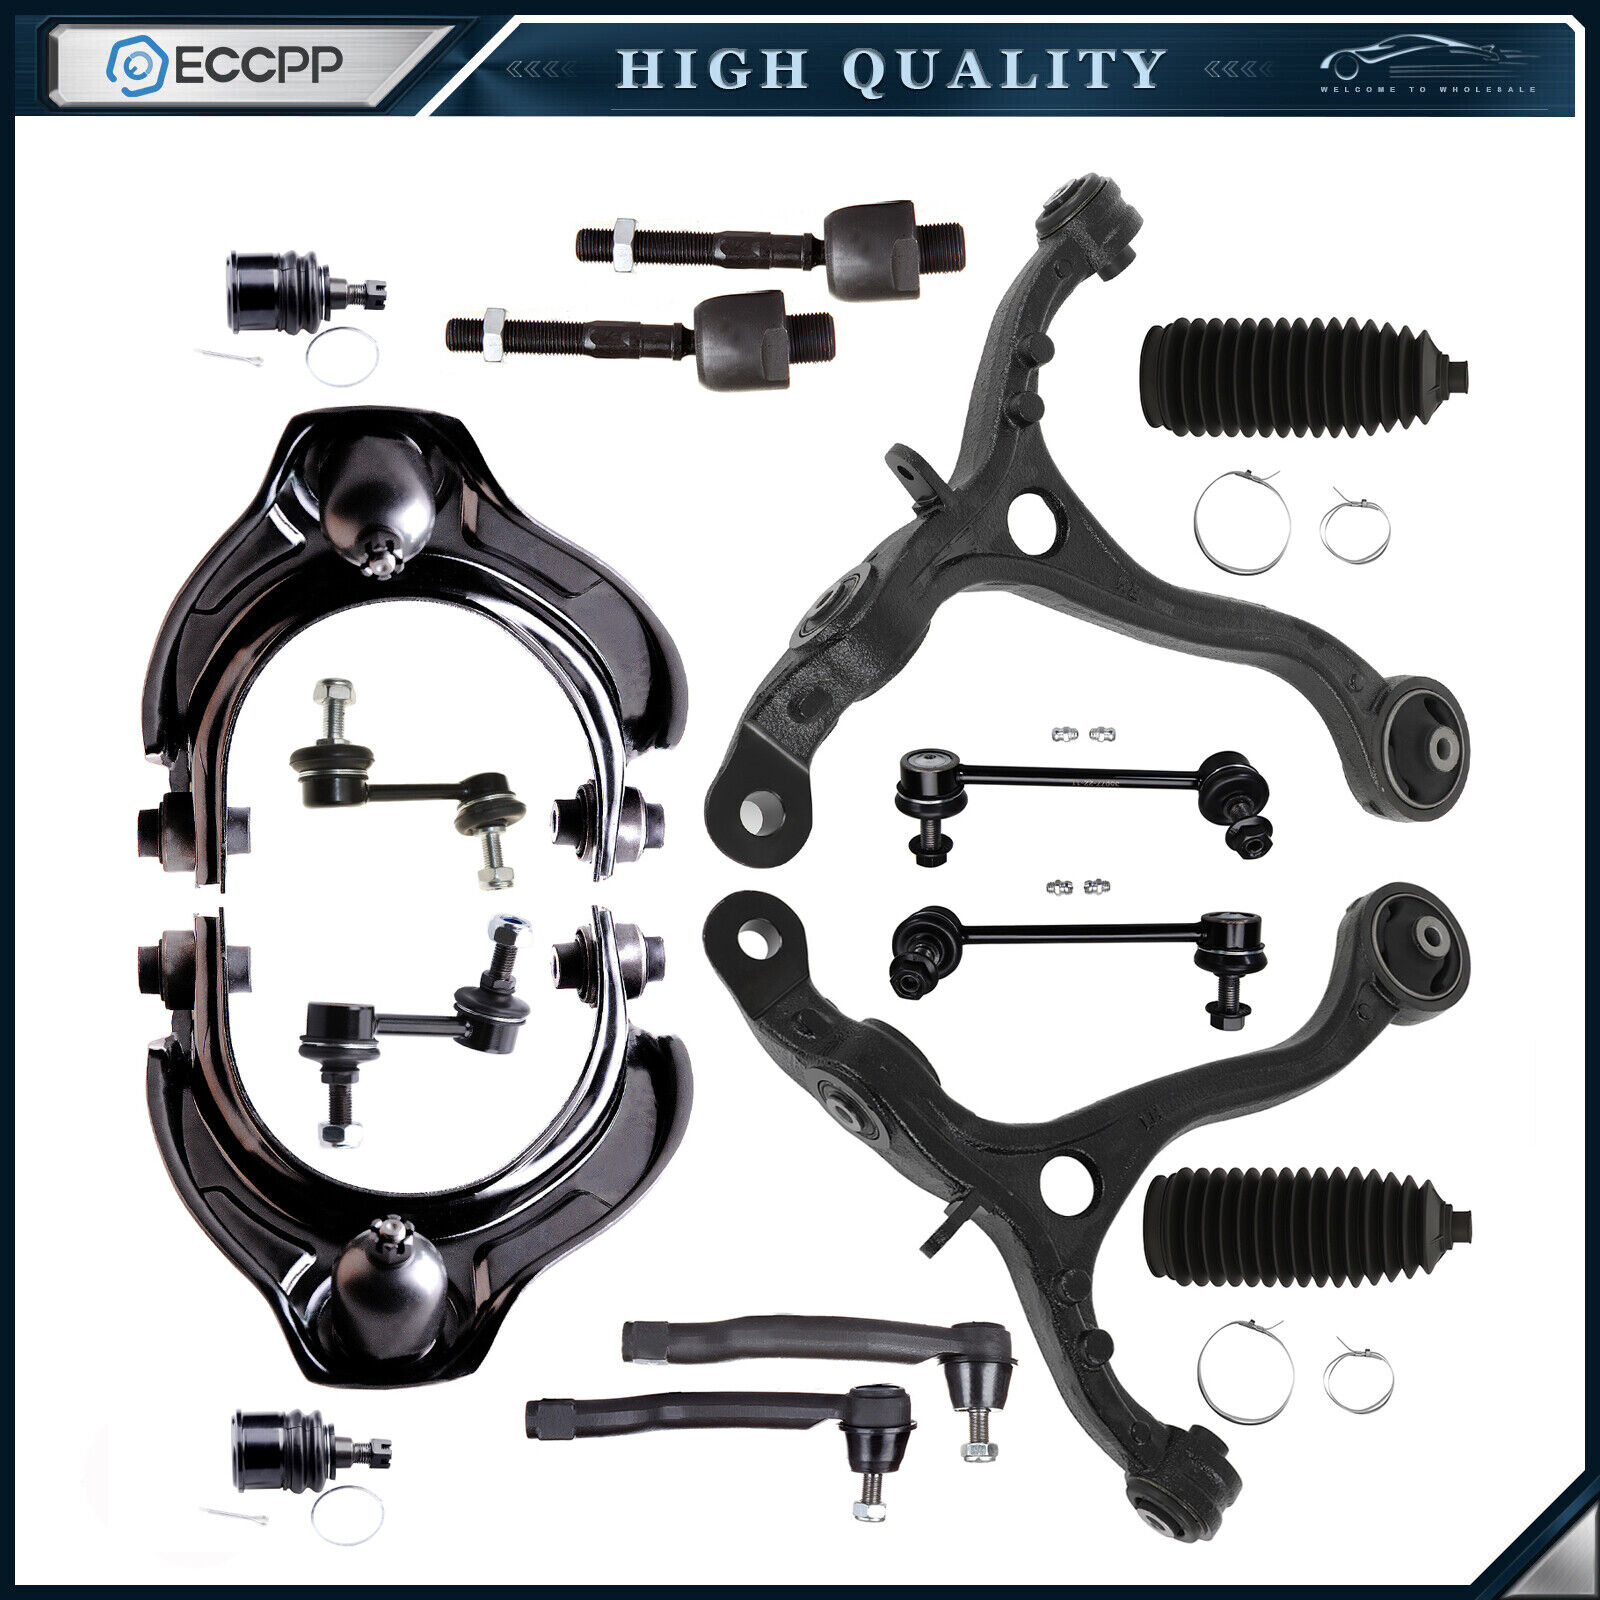 16pcs Front Upper & Lower Control Arms Suspension Kit For 2008-2012 HONDA ACCORD